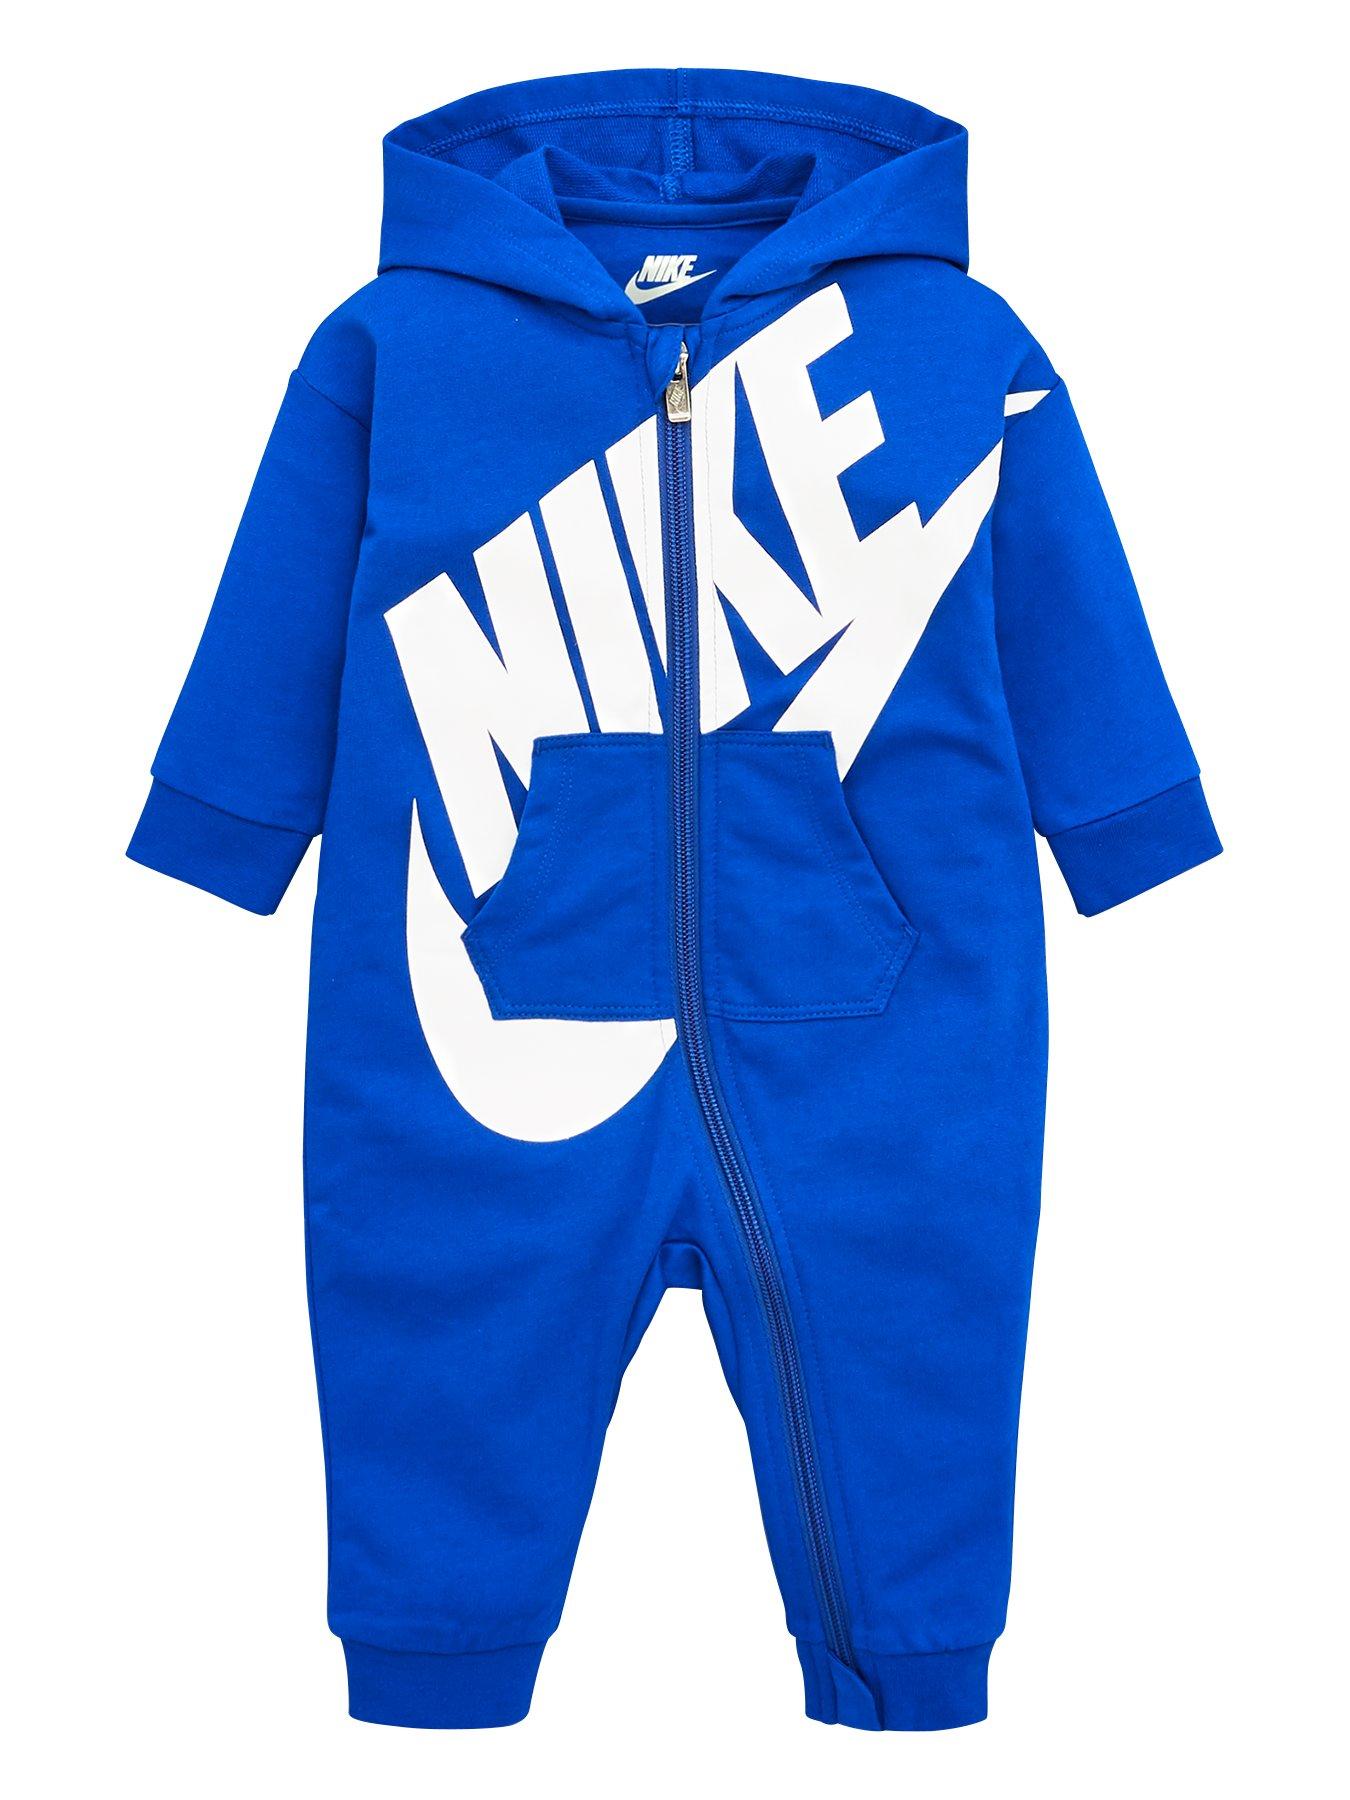 Nike Baby Boys Futura All In One - Blue, Blue, Size 6 Months